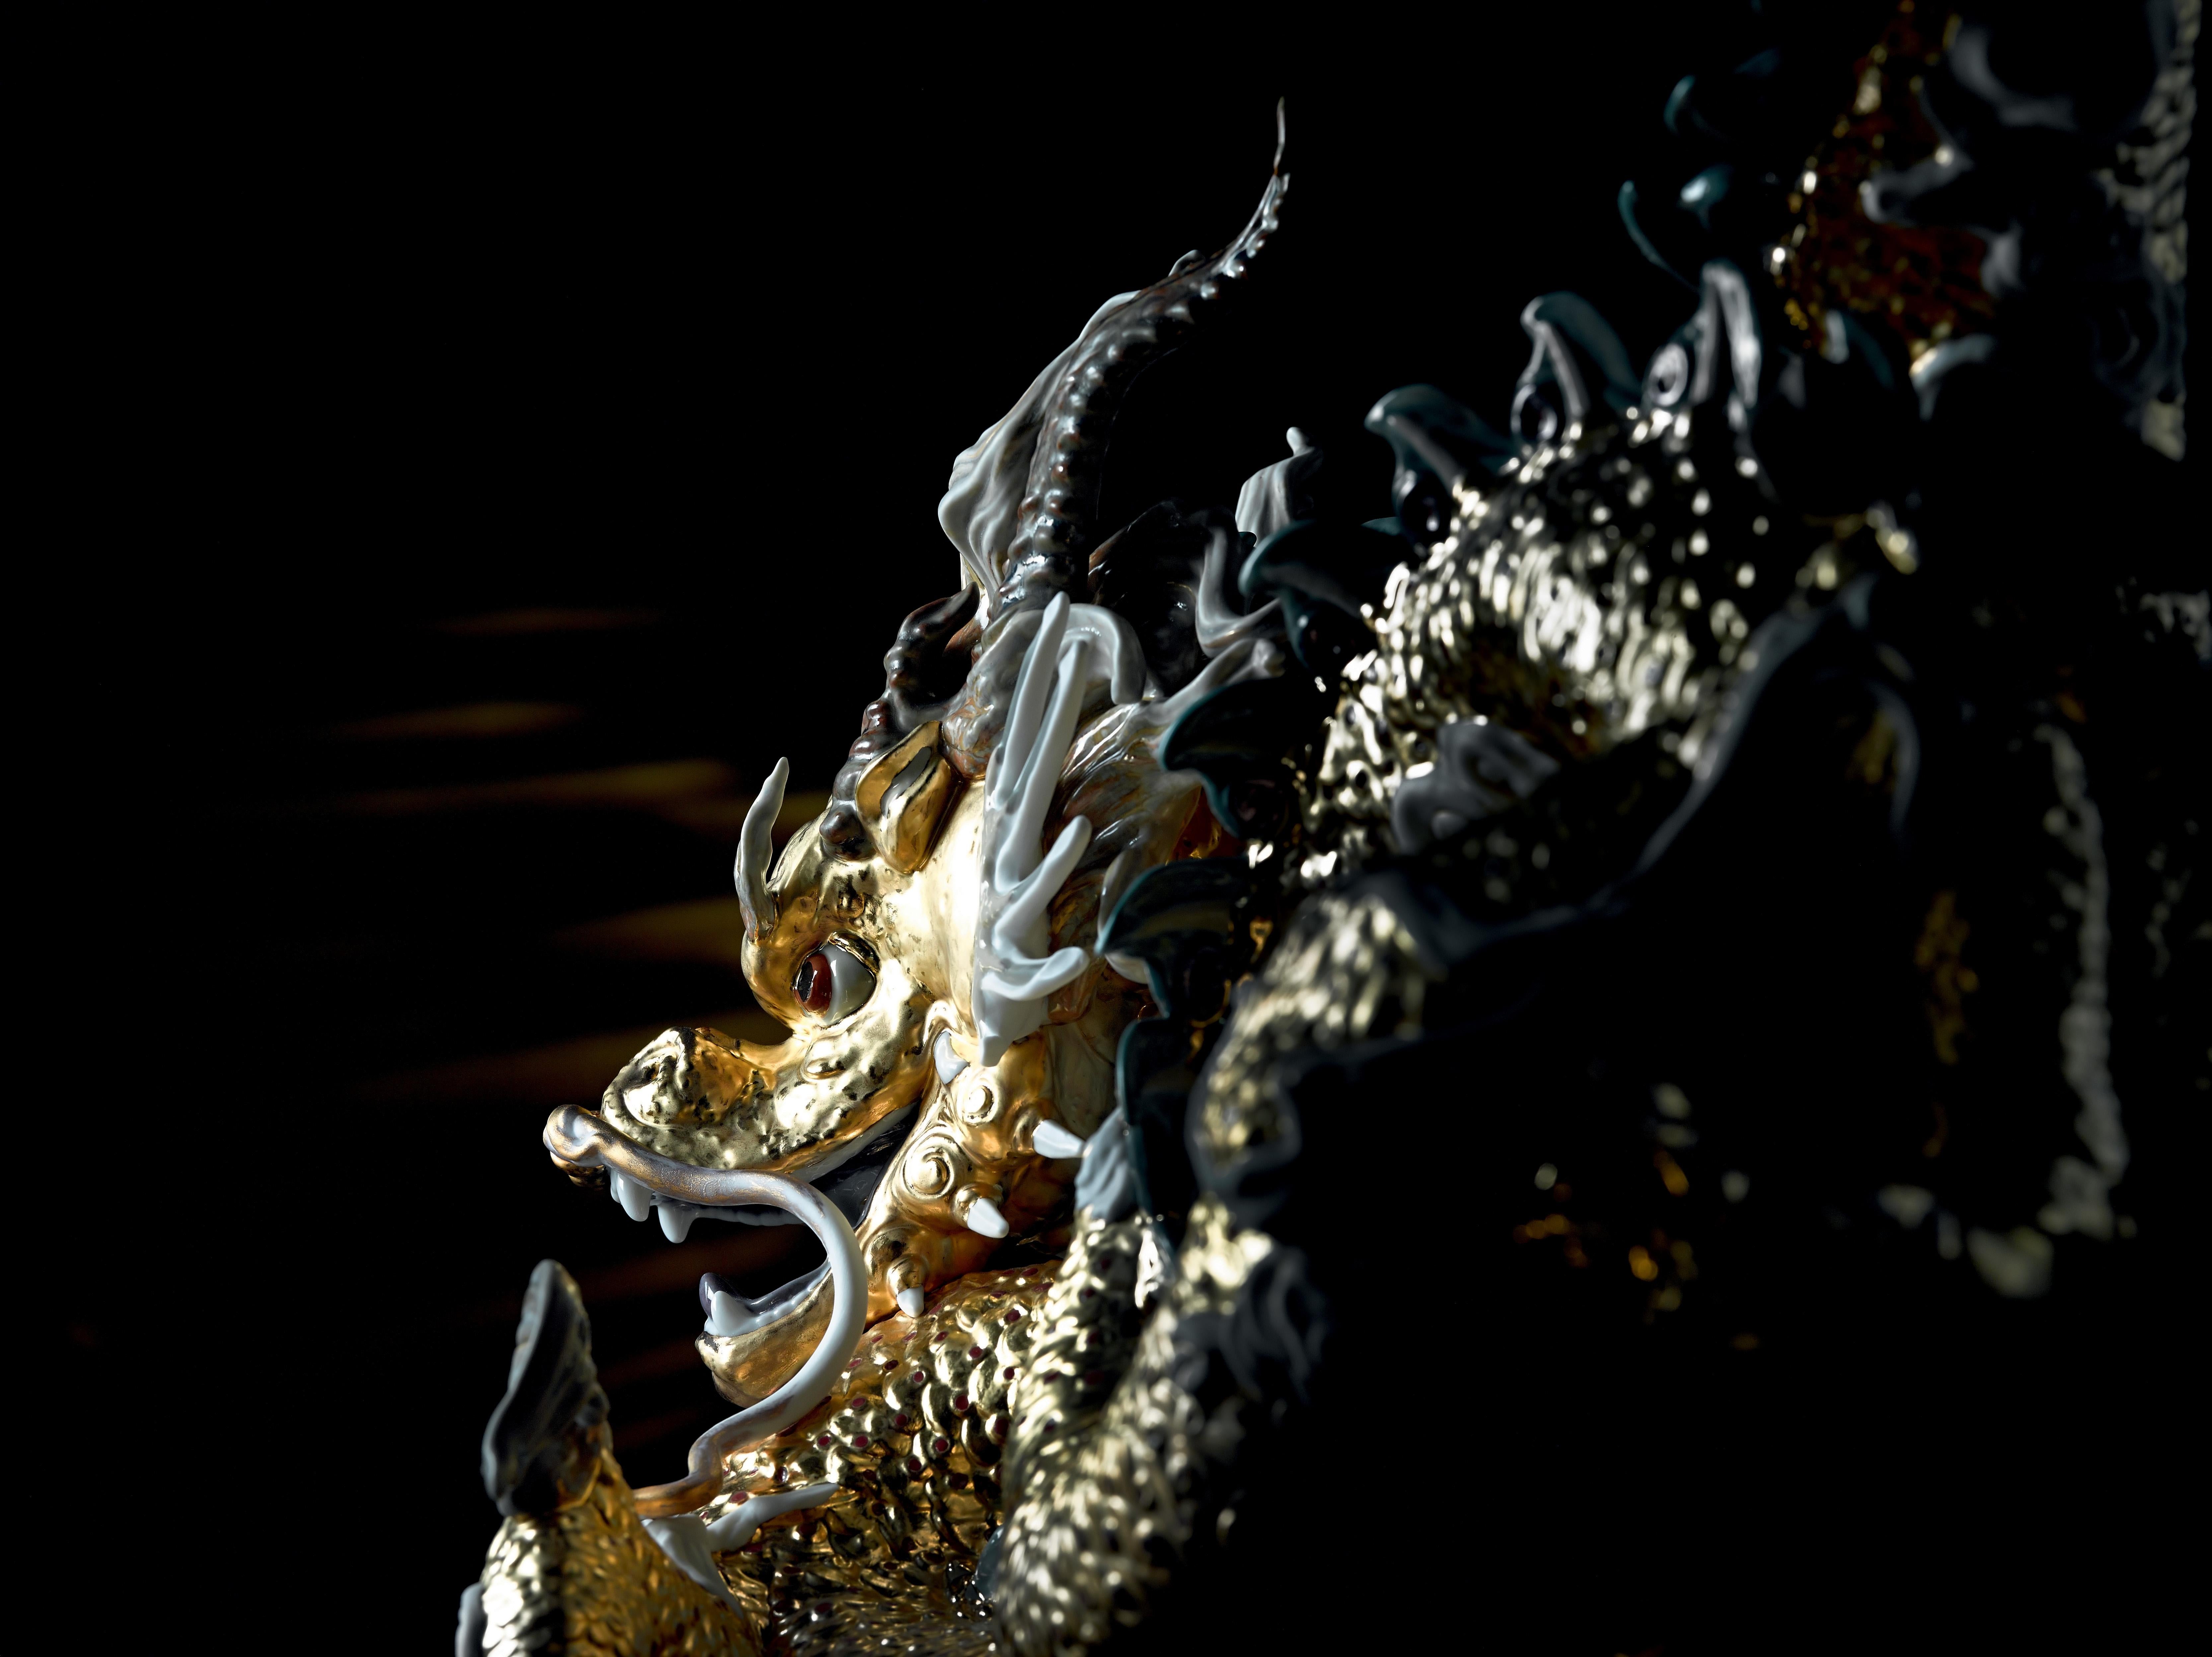 Limited edition dragon sculpture in matte porcelain with gold lustre. A symbol of power and prosperity in Eastern culture, this magical creature, the bearer of good luck, is the protagonist in this spectacular High Porcelain limited edition. The